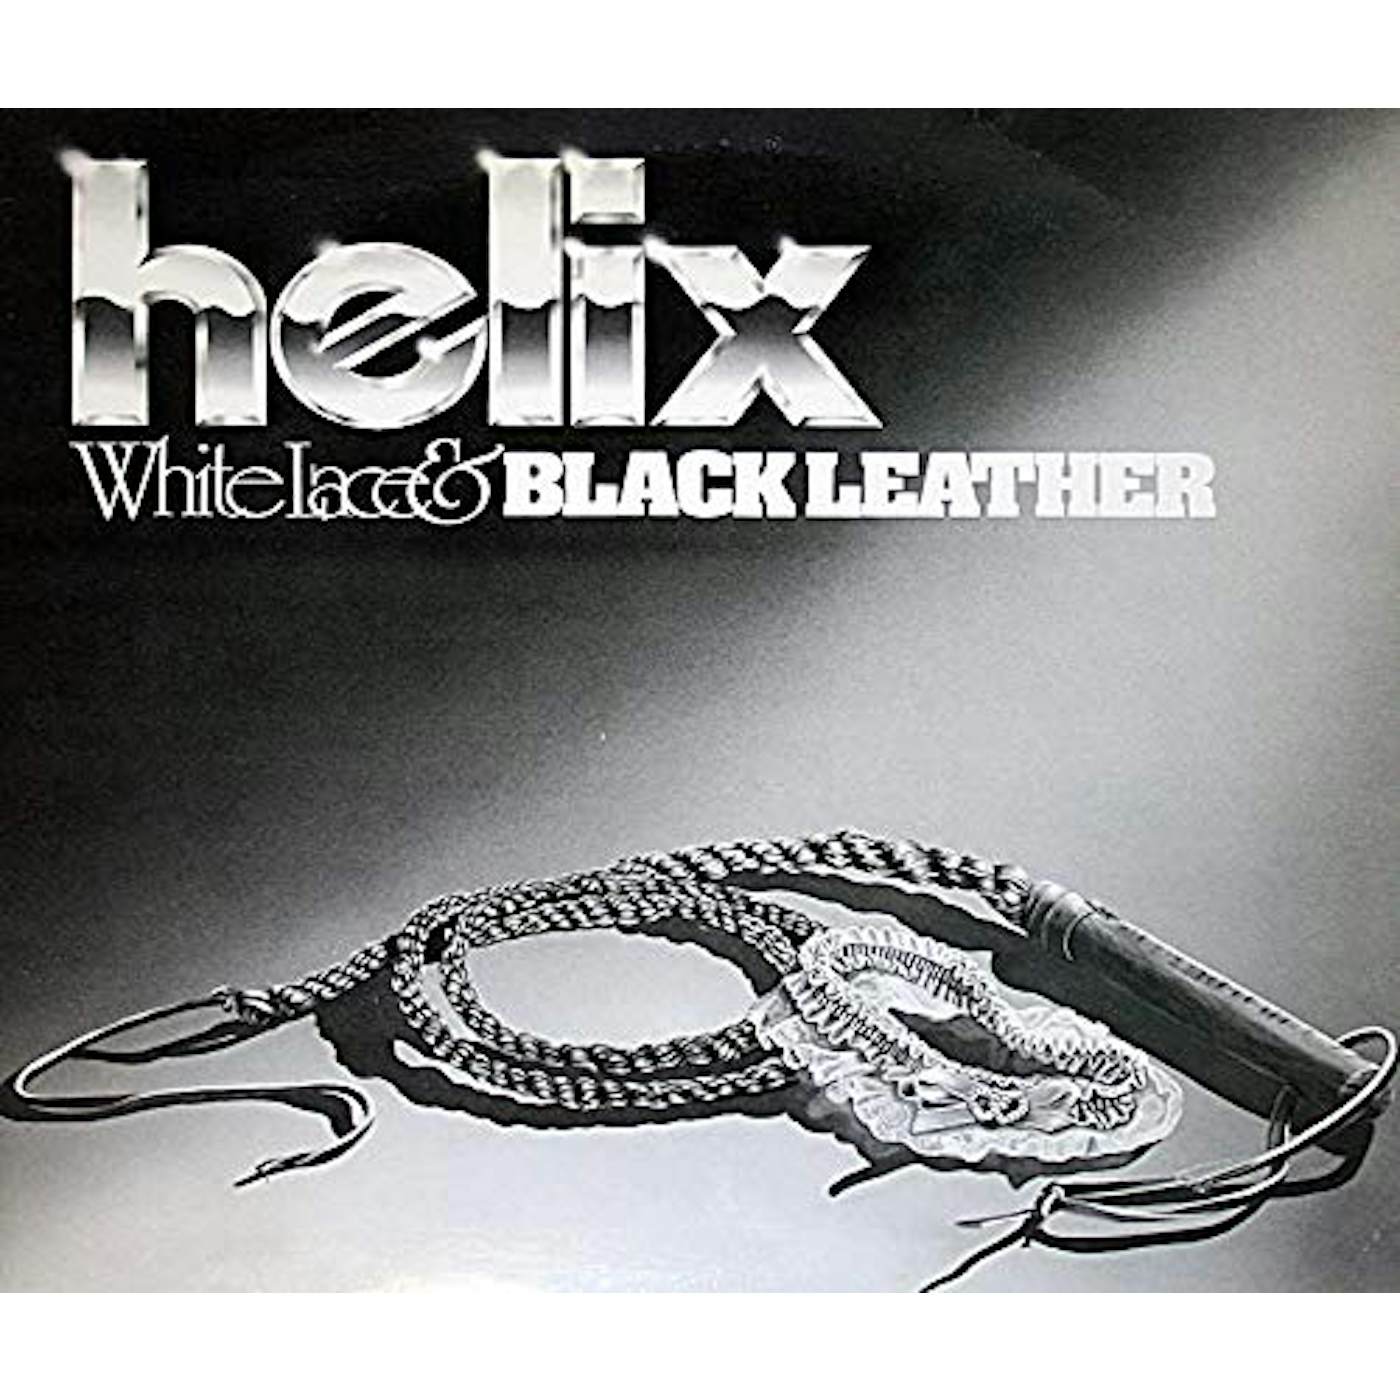 Helix WHITE LACE & BLACK LEATHER - EXPANDED EDITION CD